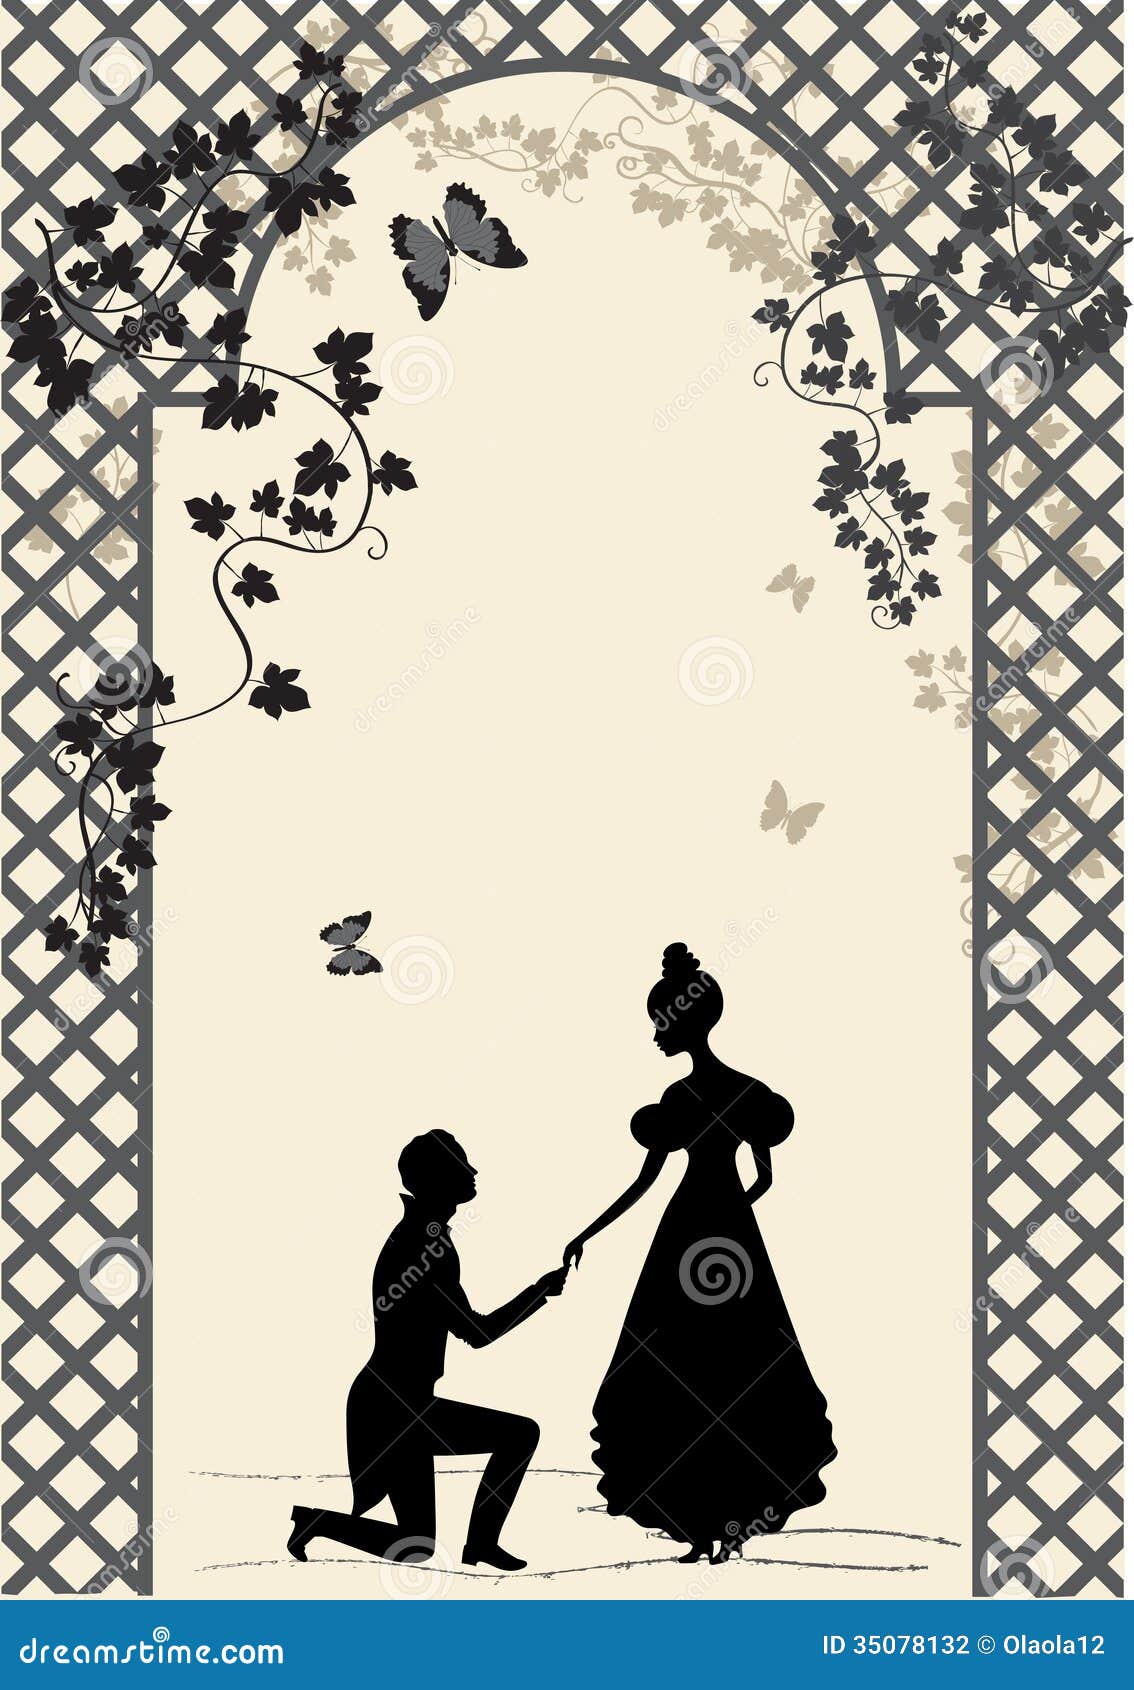 https://thumbs.dreamstime.com/z/proposal-young-man-makes-to-girl-under-arbor-35078132.jpg